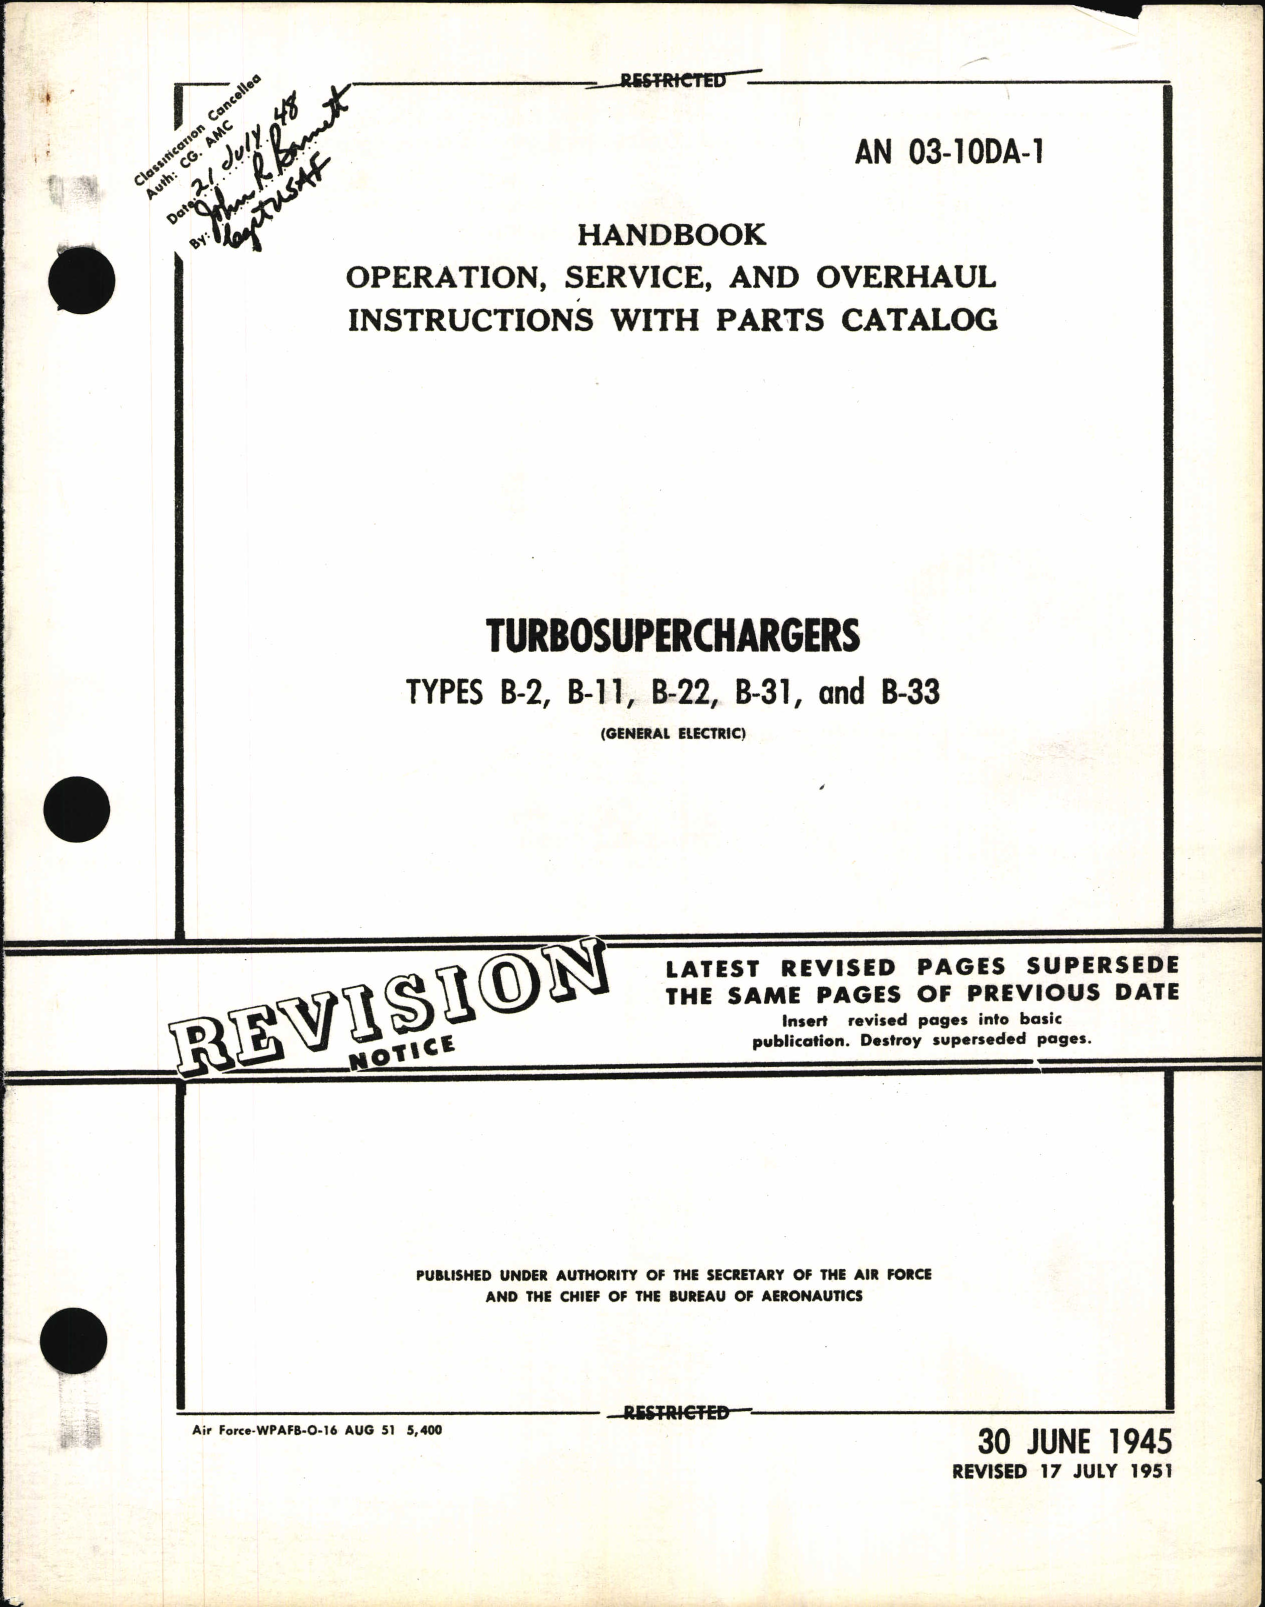 Sample page 1 from AirCorps Library document: Operation, Service, & Overhaul Instructions with Parts Catalog for Turbosuperchargers Types B-2, B-11, B-22, B-31, and B-33